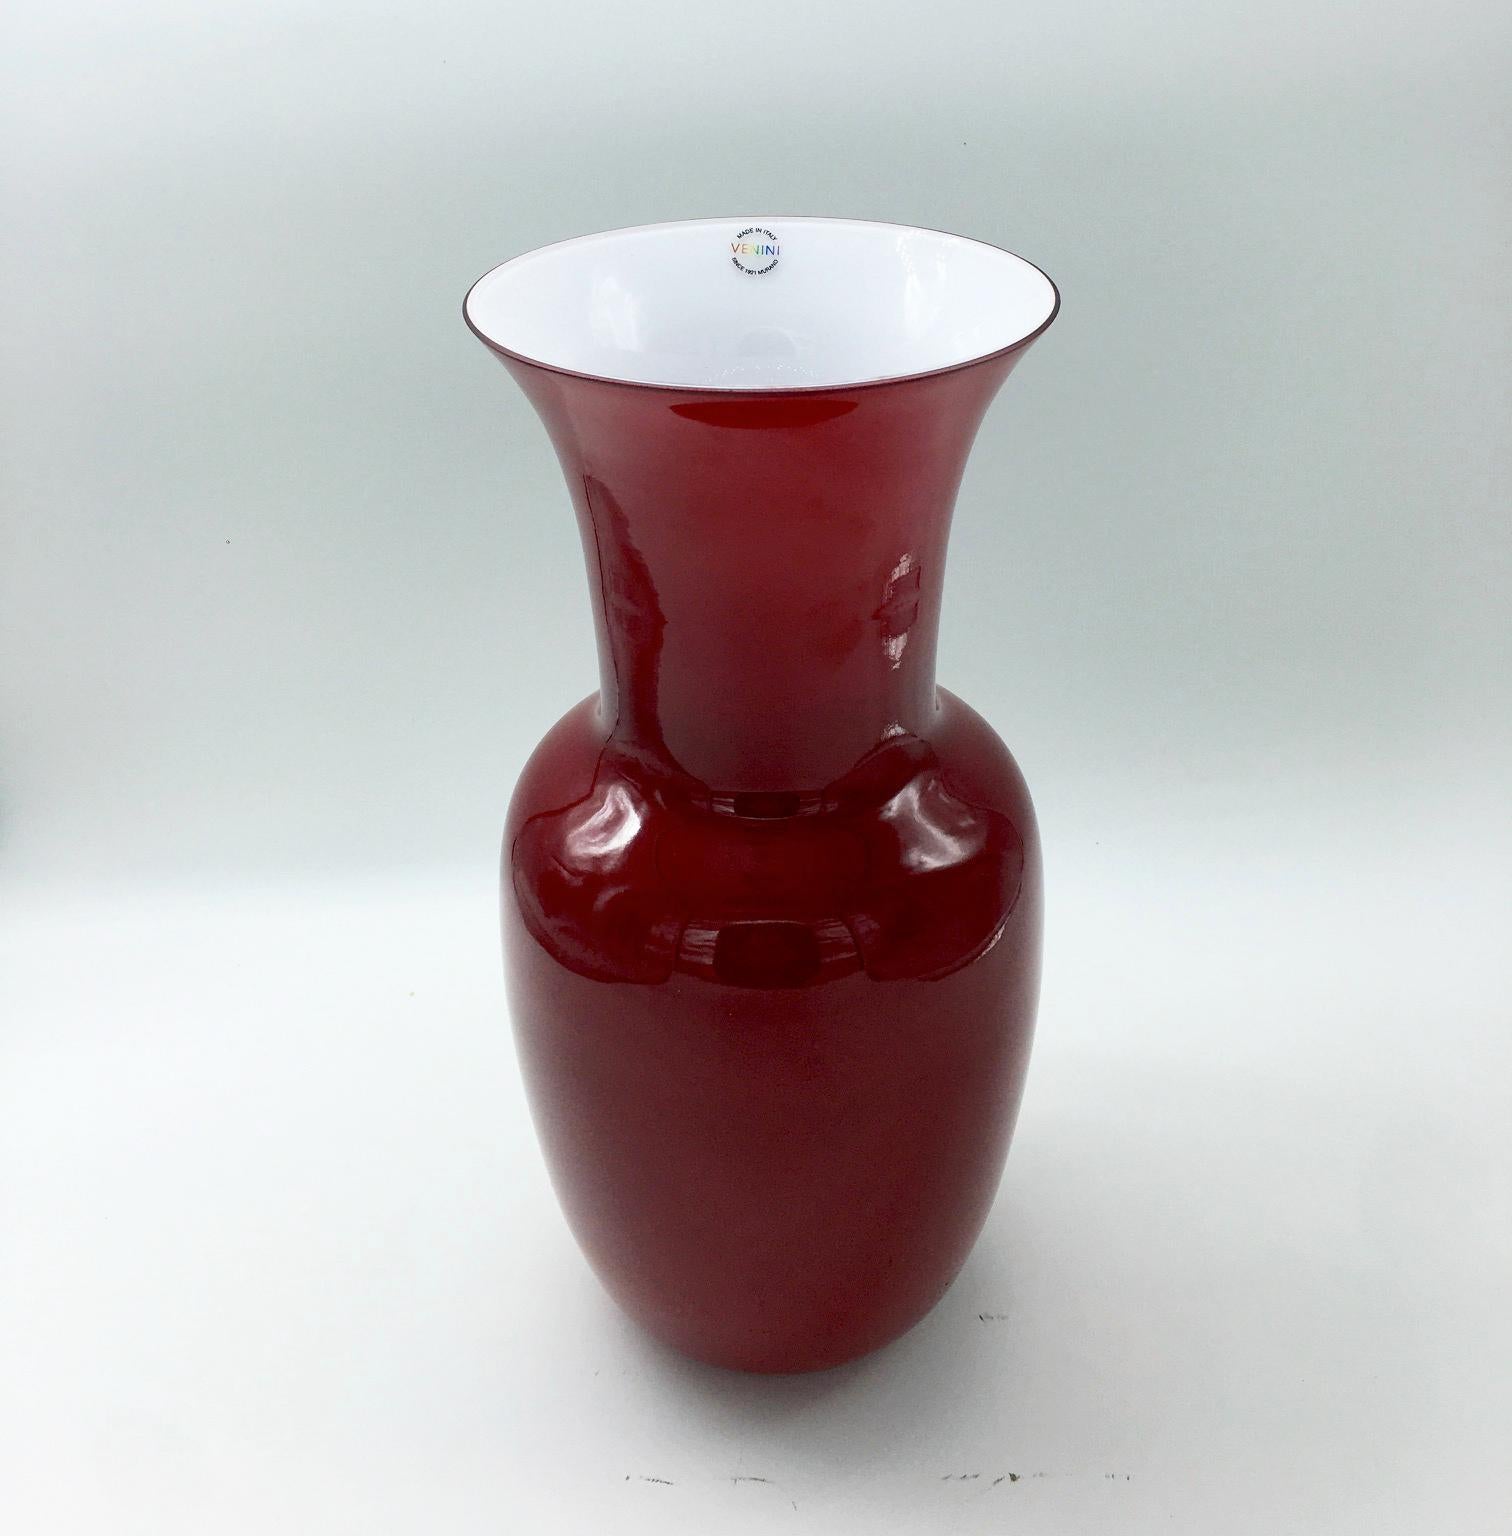 Venini glass vase with slim, oval shaped body and funnel shaped neck. Featured in red colored glass.